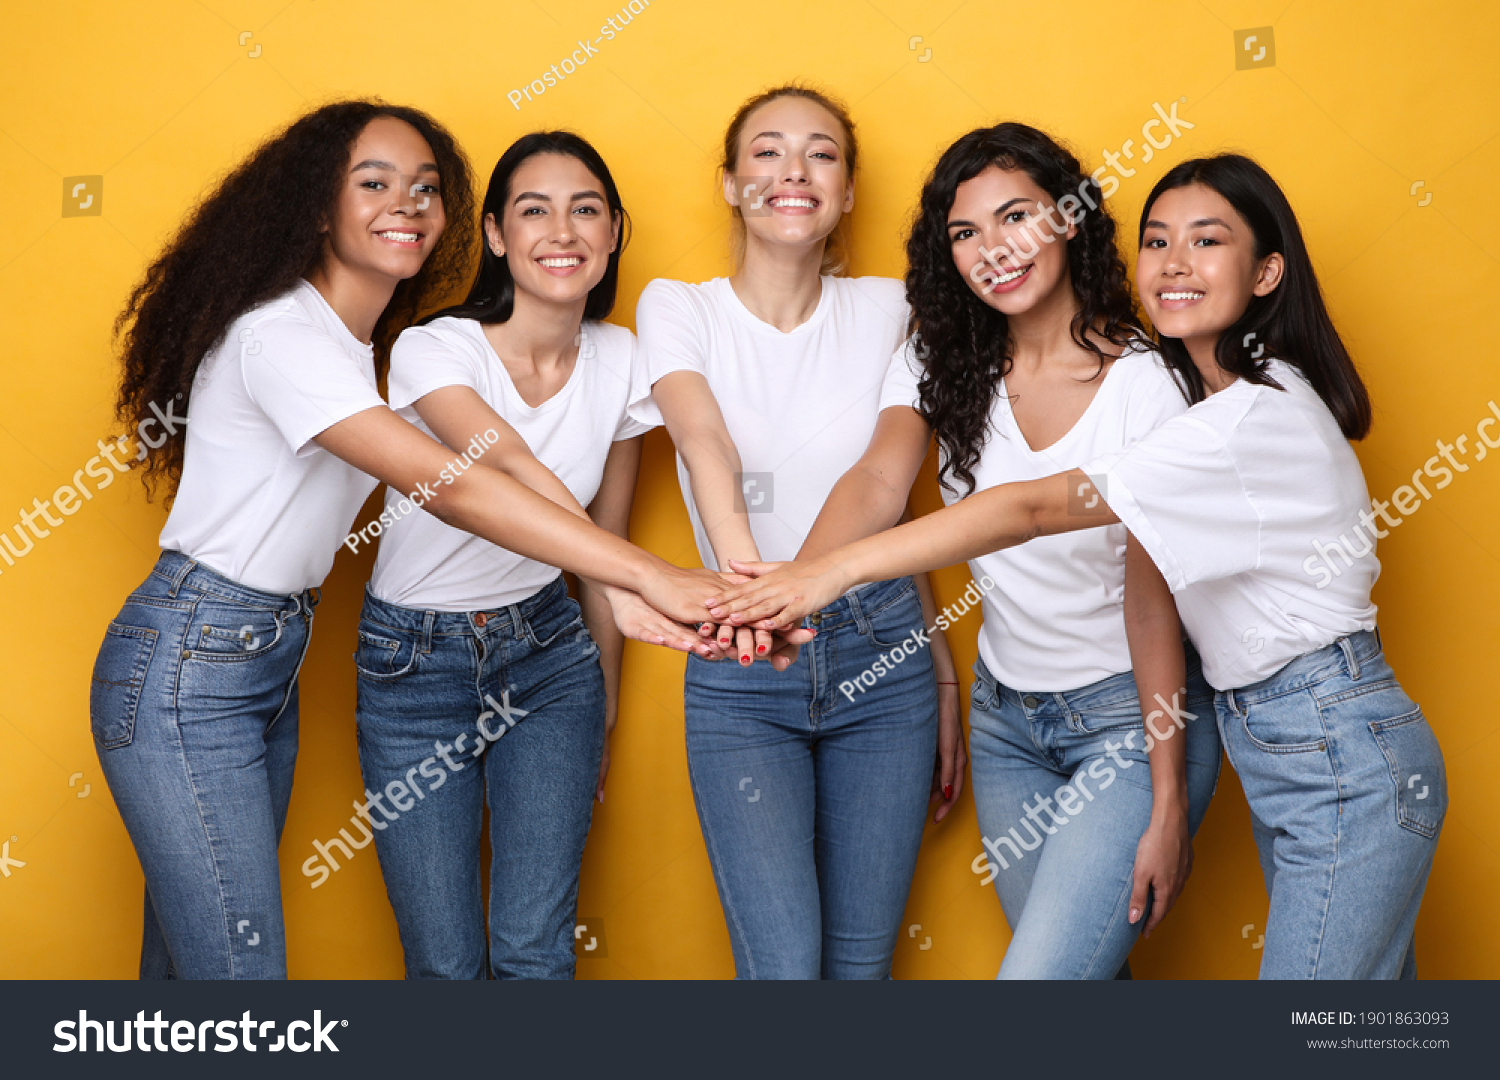 Five Cheerful Diverse Women Holding Hands Standing On Yellow Studio Background, Smiling To Camera. Female Unity And Friendship, Togetherness And Teamwork Concept #1901863093